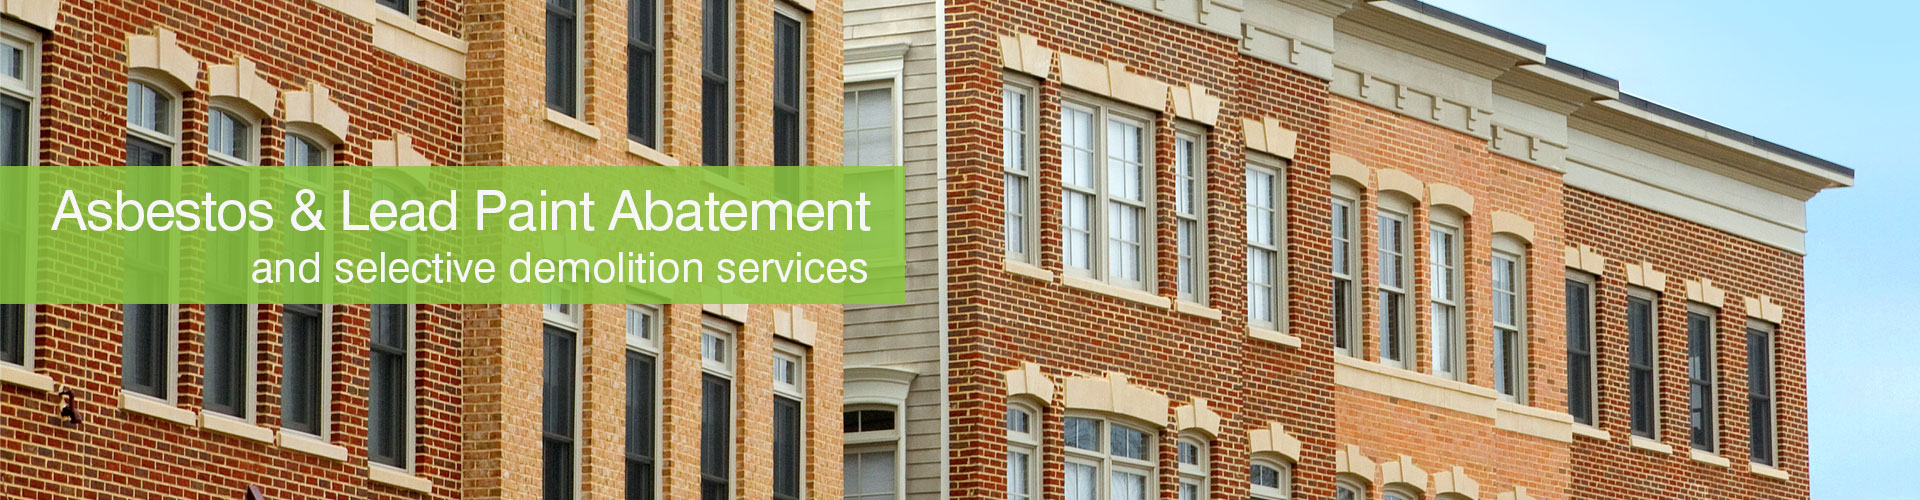 Certainty Environmental specializes in Asbestos Abatement, Lead Paint Abatement and Selective Demolition Services